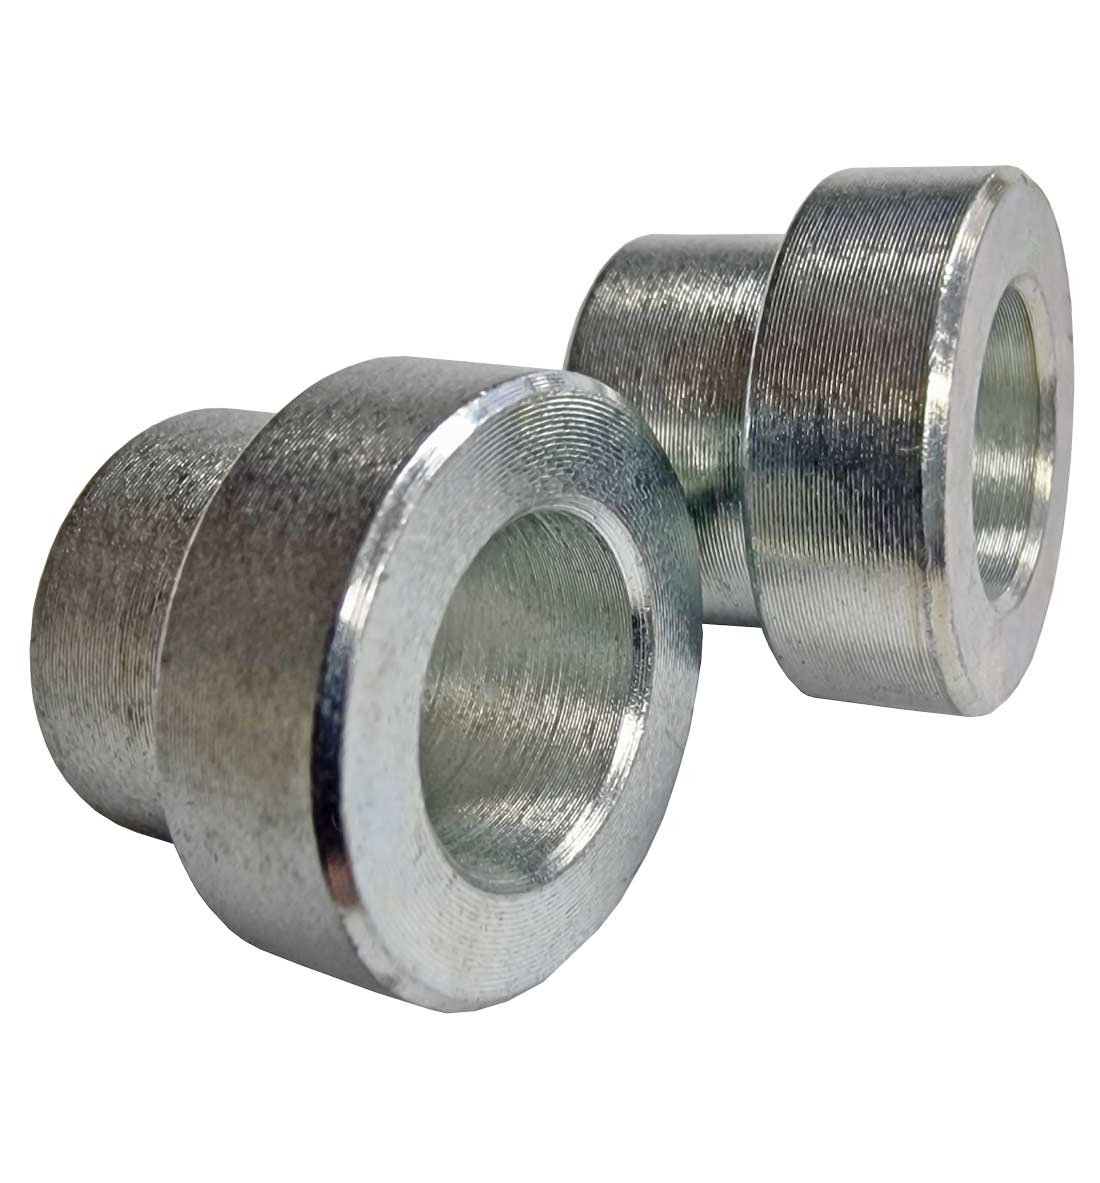 1/2" to 3/8" Top Hat Reducers